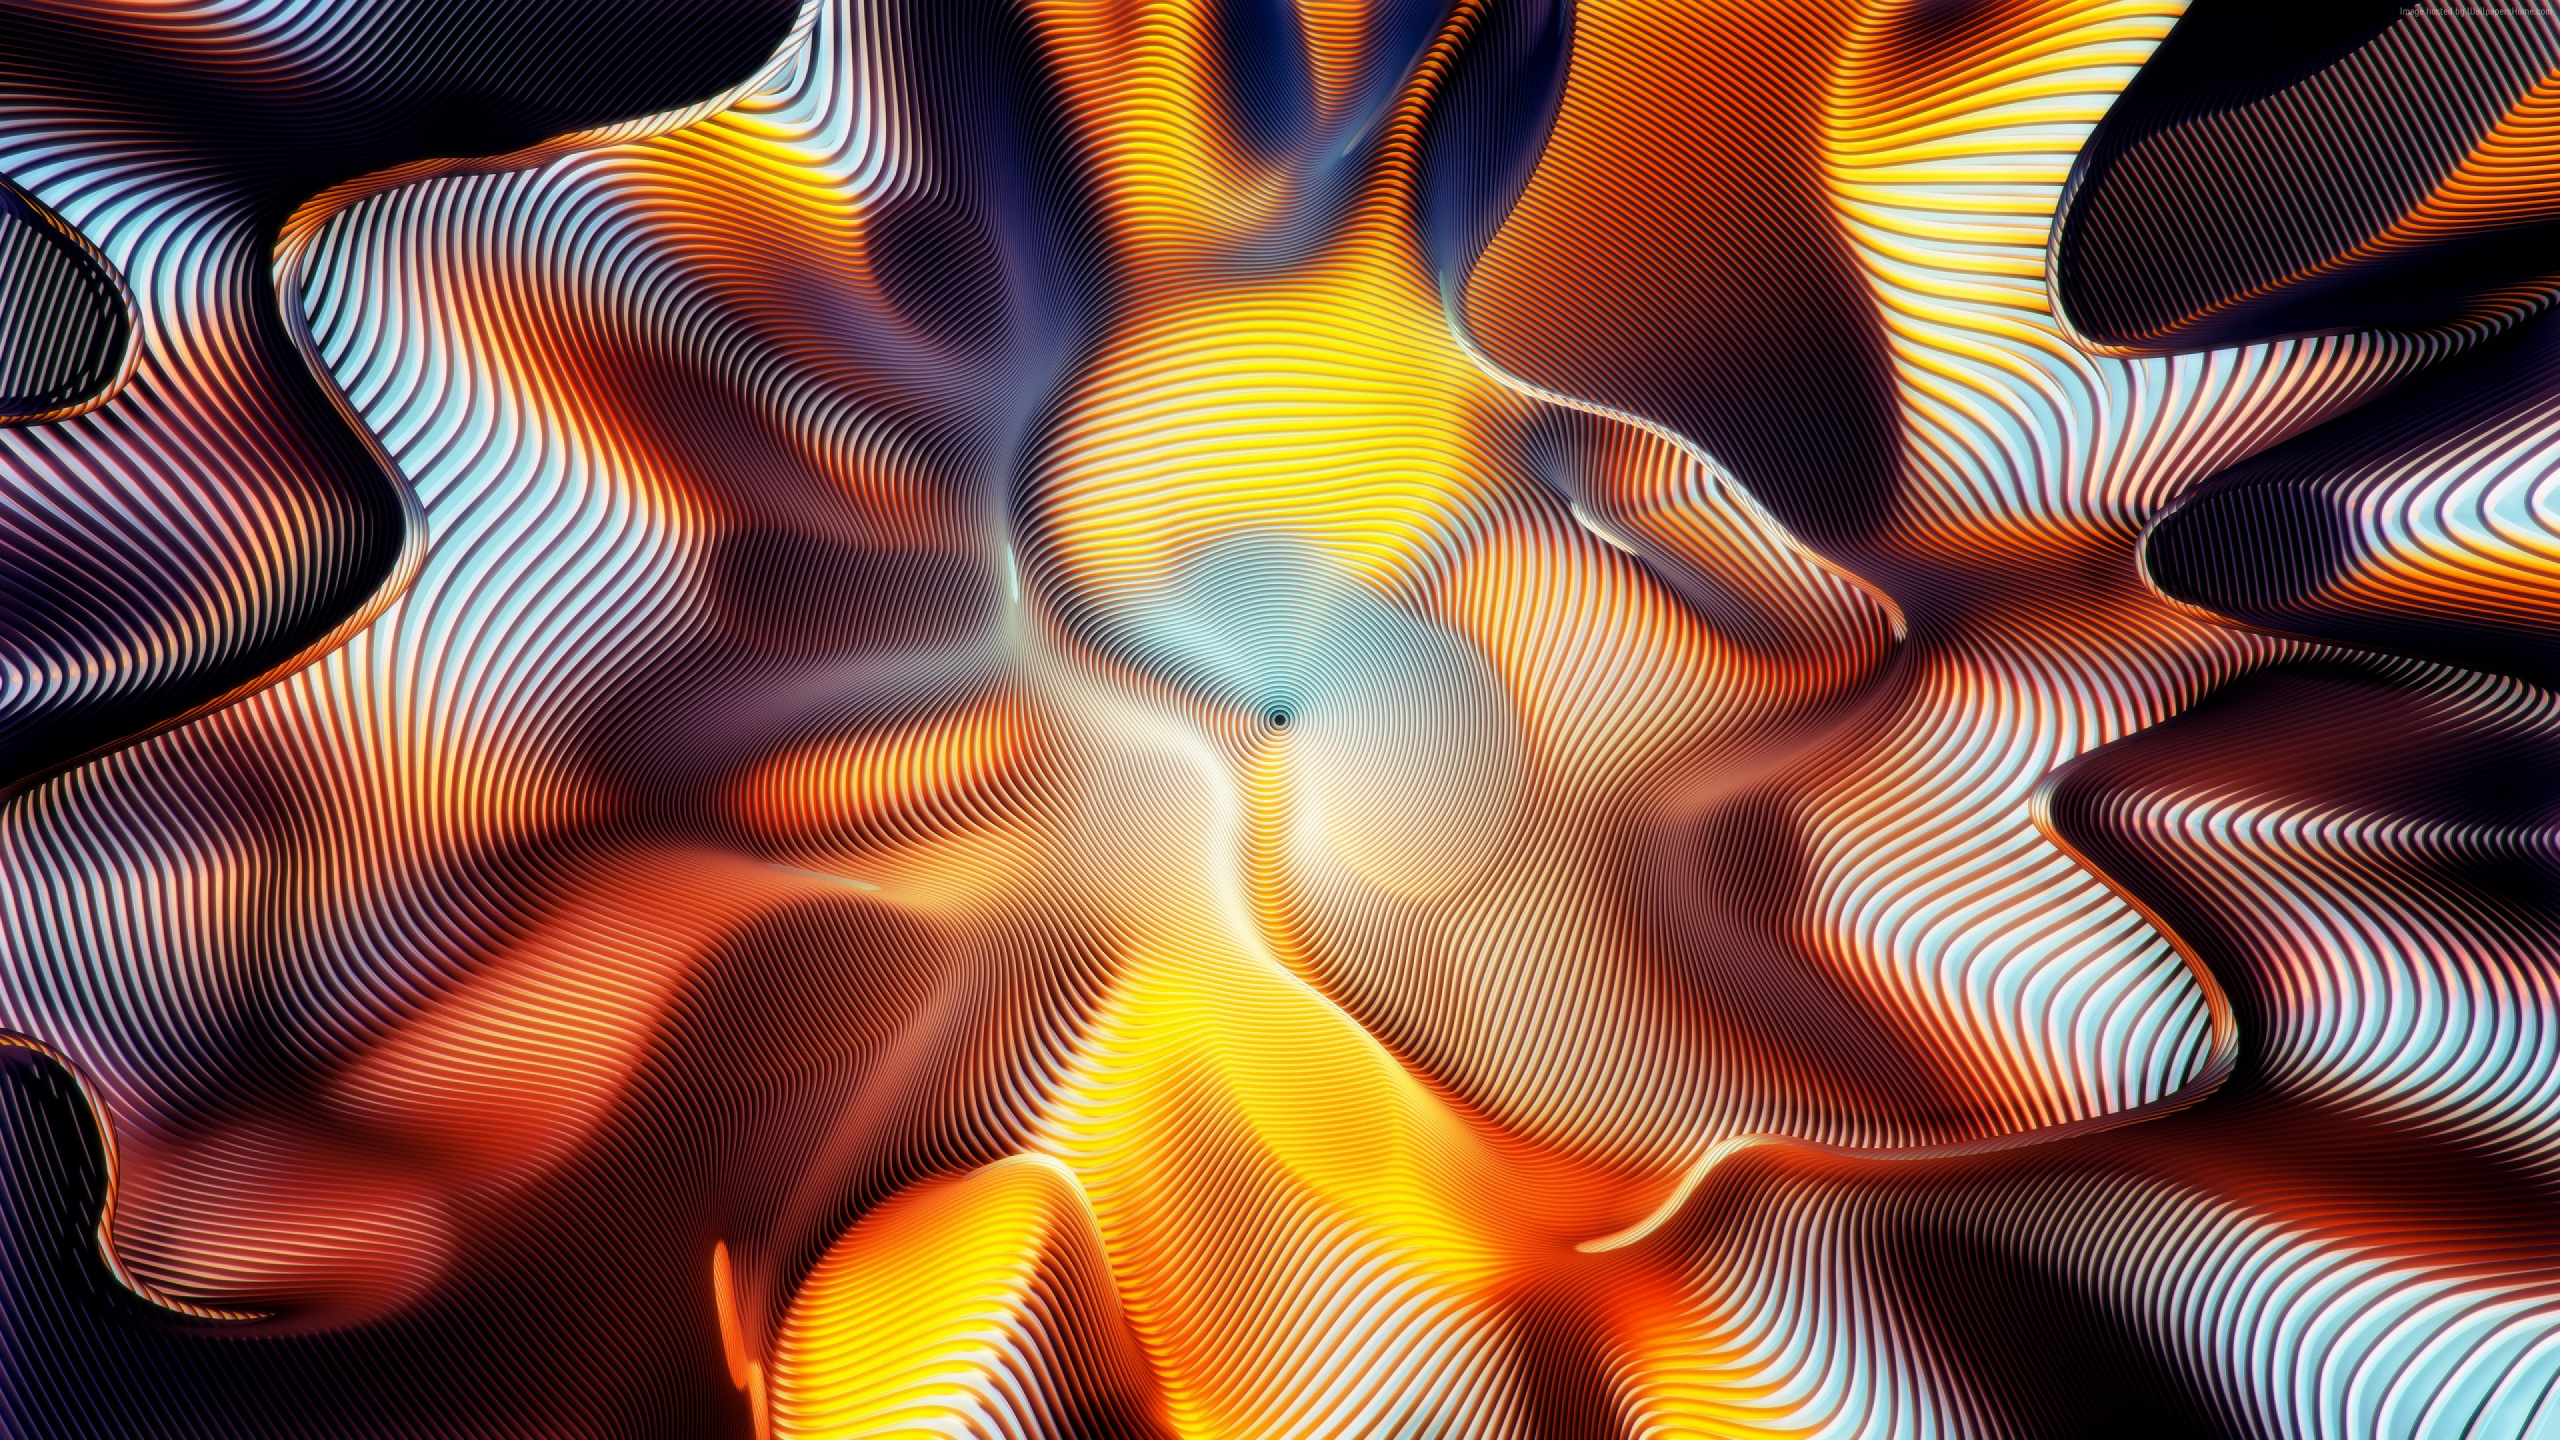 Blue and Orange Abstract Painting. Wallpaper in 2560x1440 Resolution